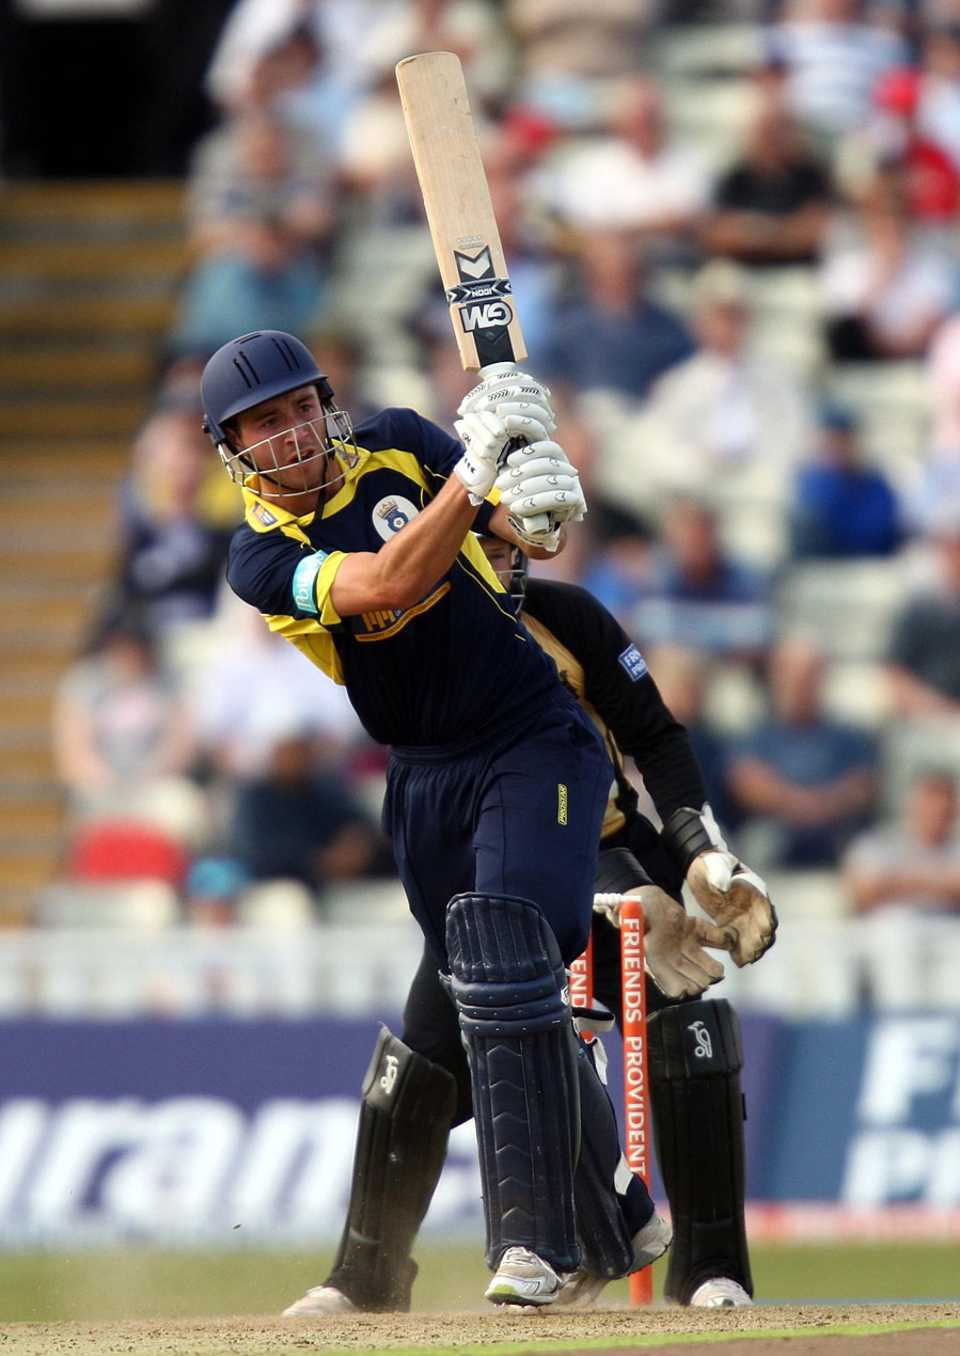 James Vince made 66 from 52 deliveries to take Hampshire into the semi-finals